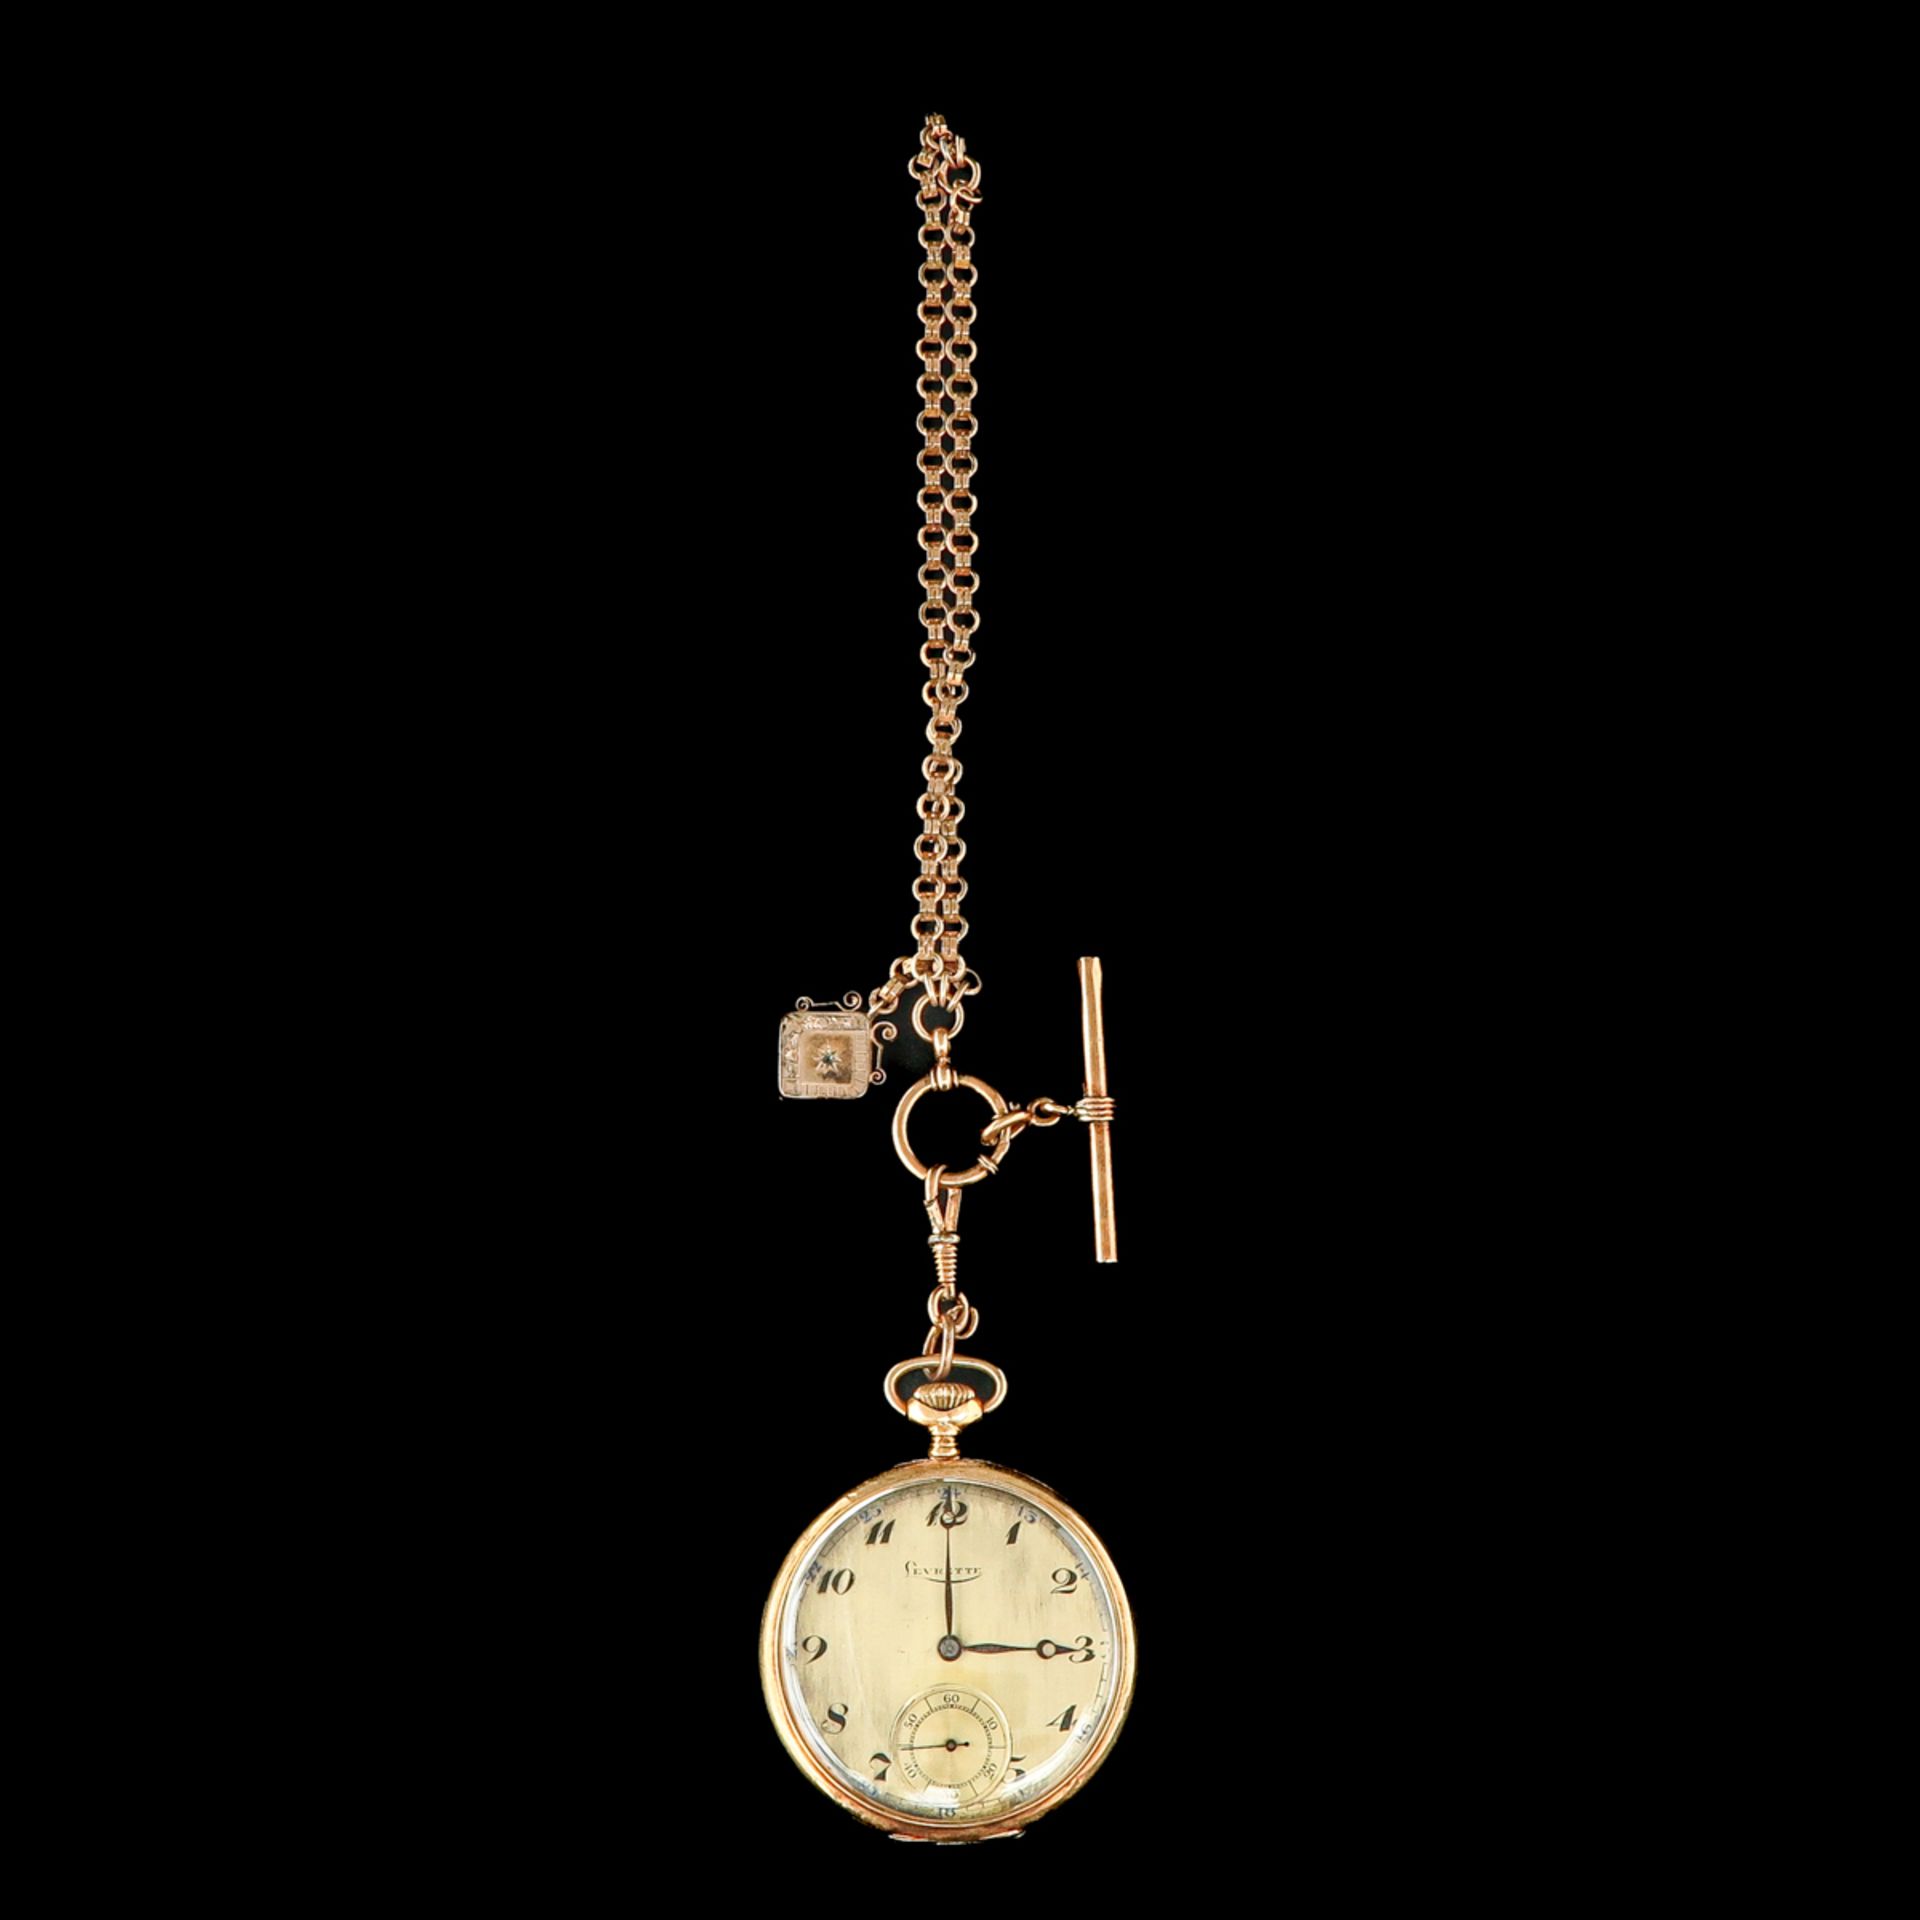 A Pocket Watch Holder with Pocket Watch - Image 2 of 7